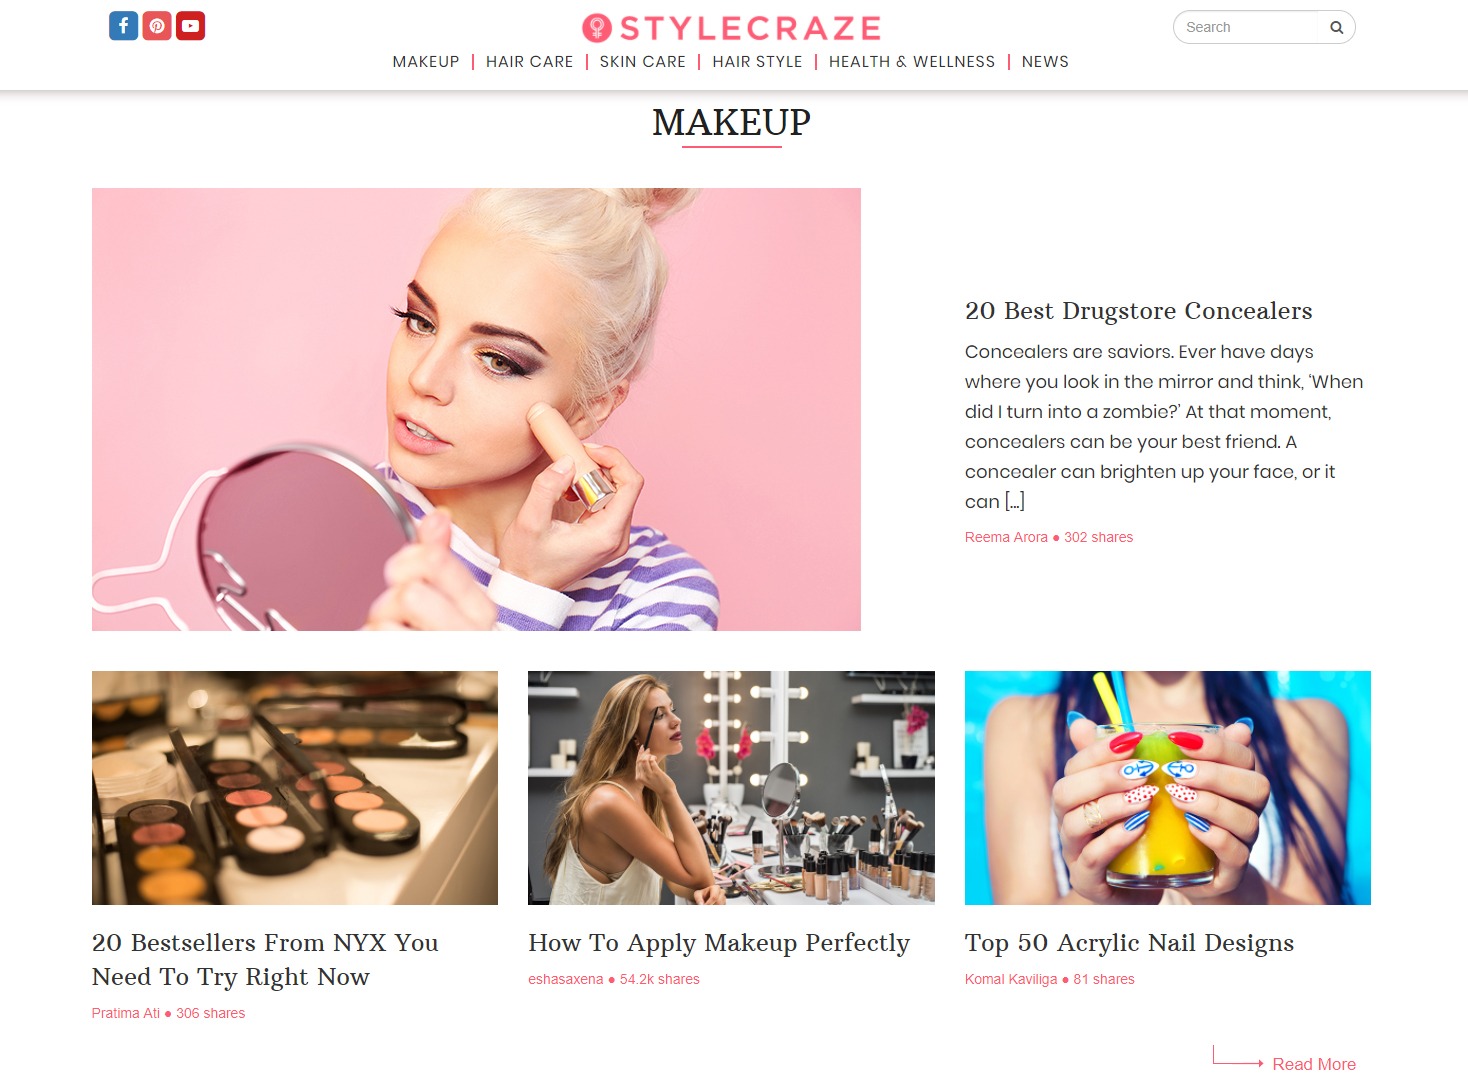 Sites like Stylecraze exist because there’s a huge demand for beauty knowledge sharing.